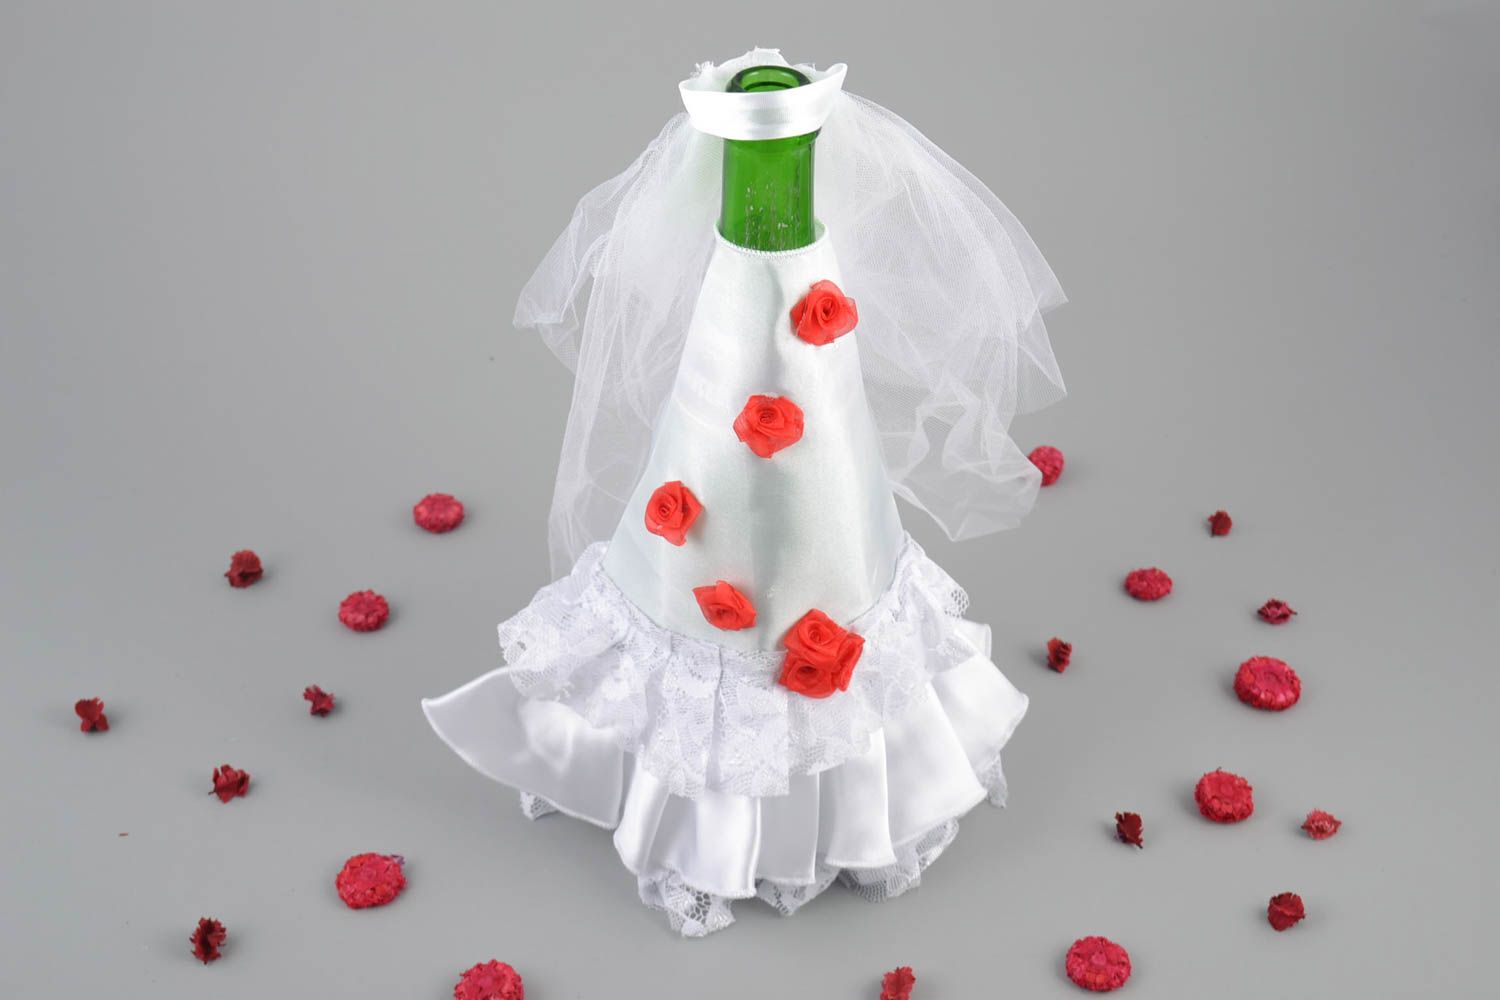 Wedding clothes for champagne bottle bride's dress with veil made of satin photo 1